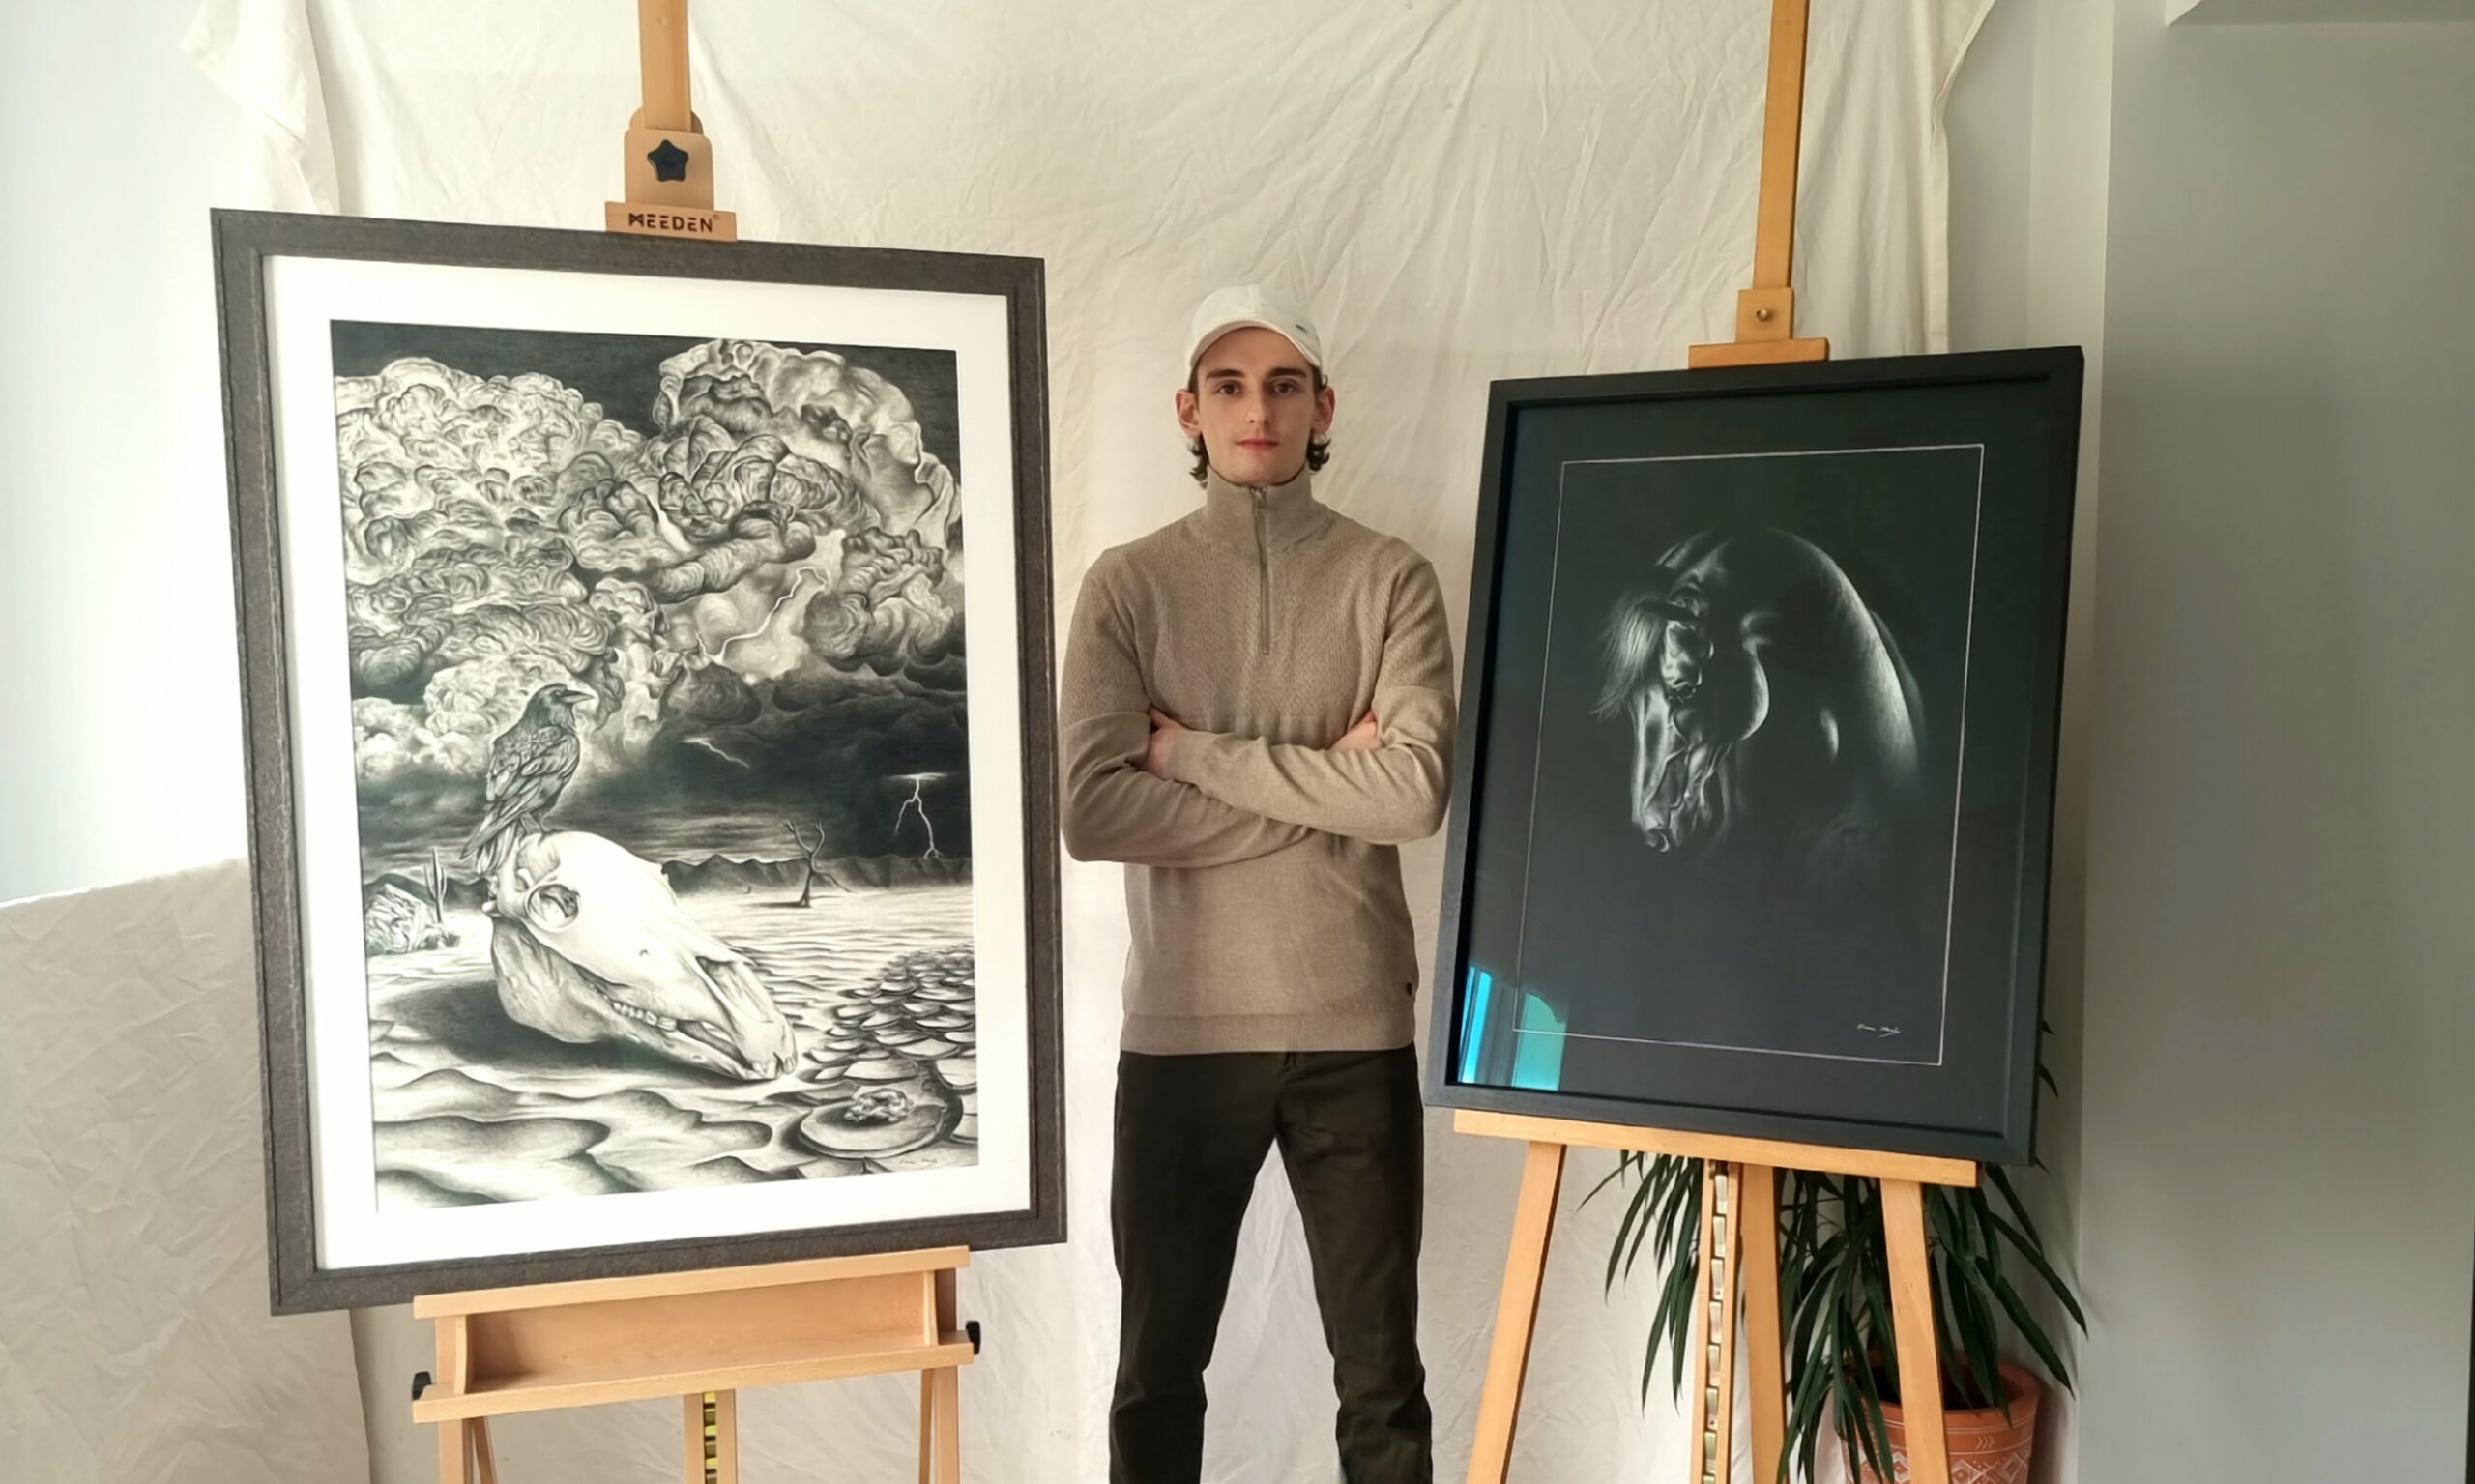 Evan Healy Humble Beginnings photographed with two of his artworks 'Meridian' and 'Morning Light' to be exhibited at The People's Museum of Limerick